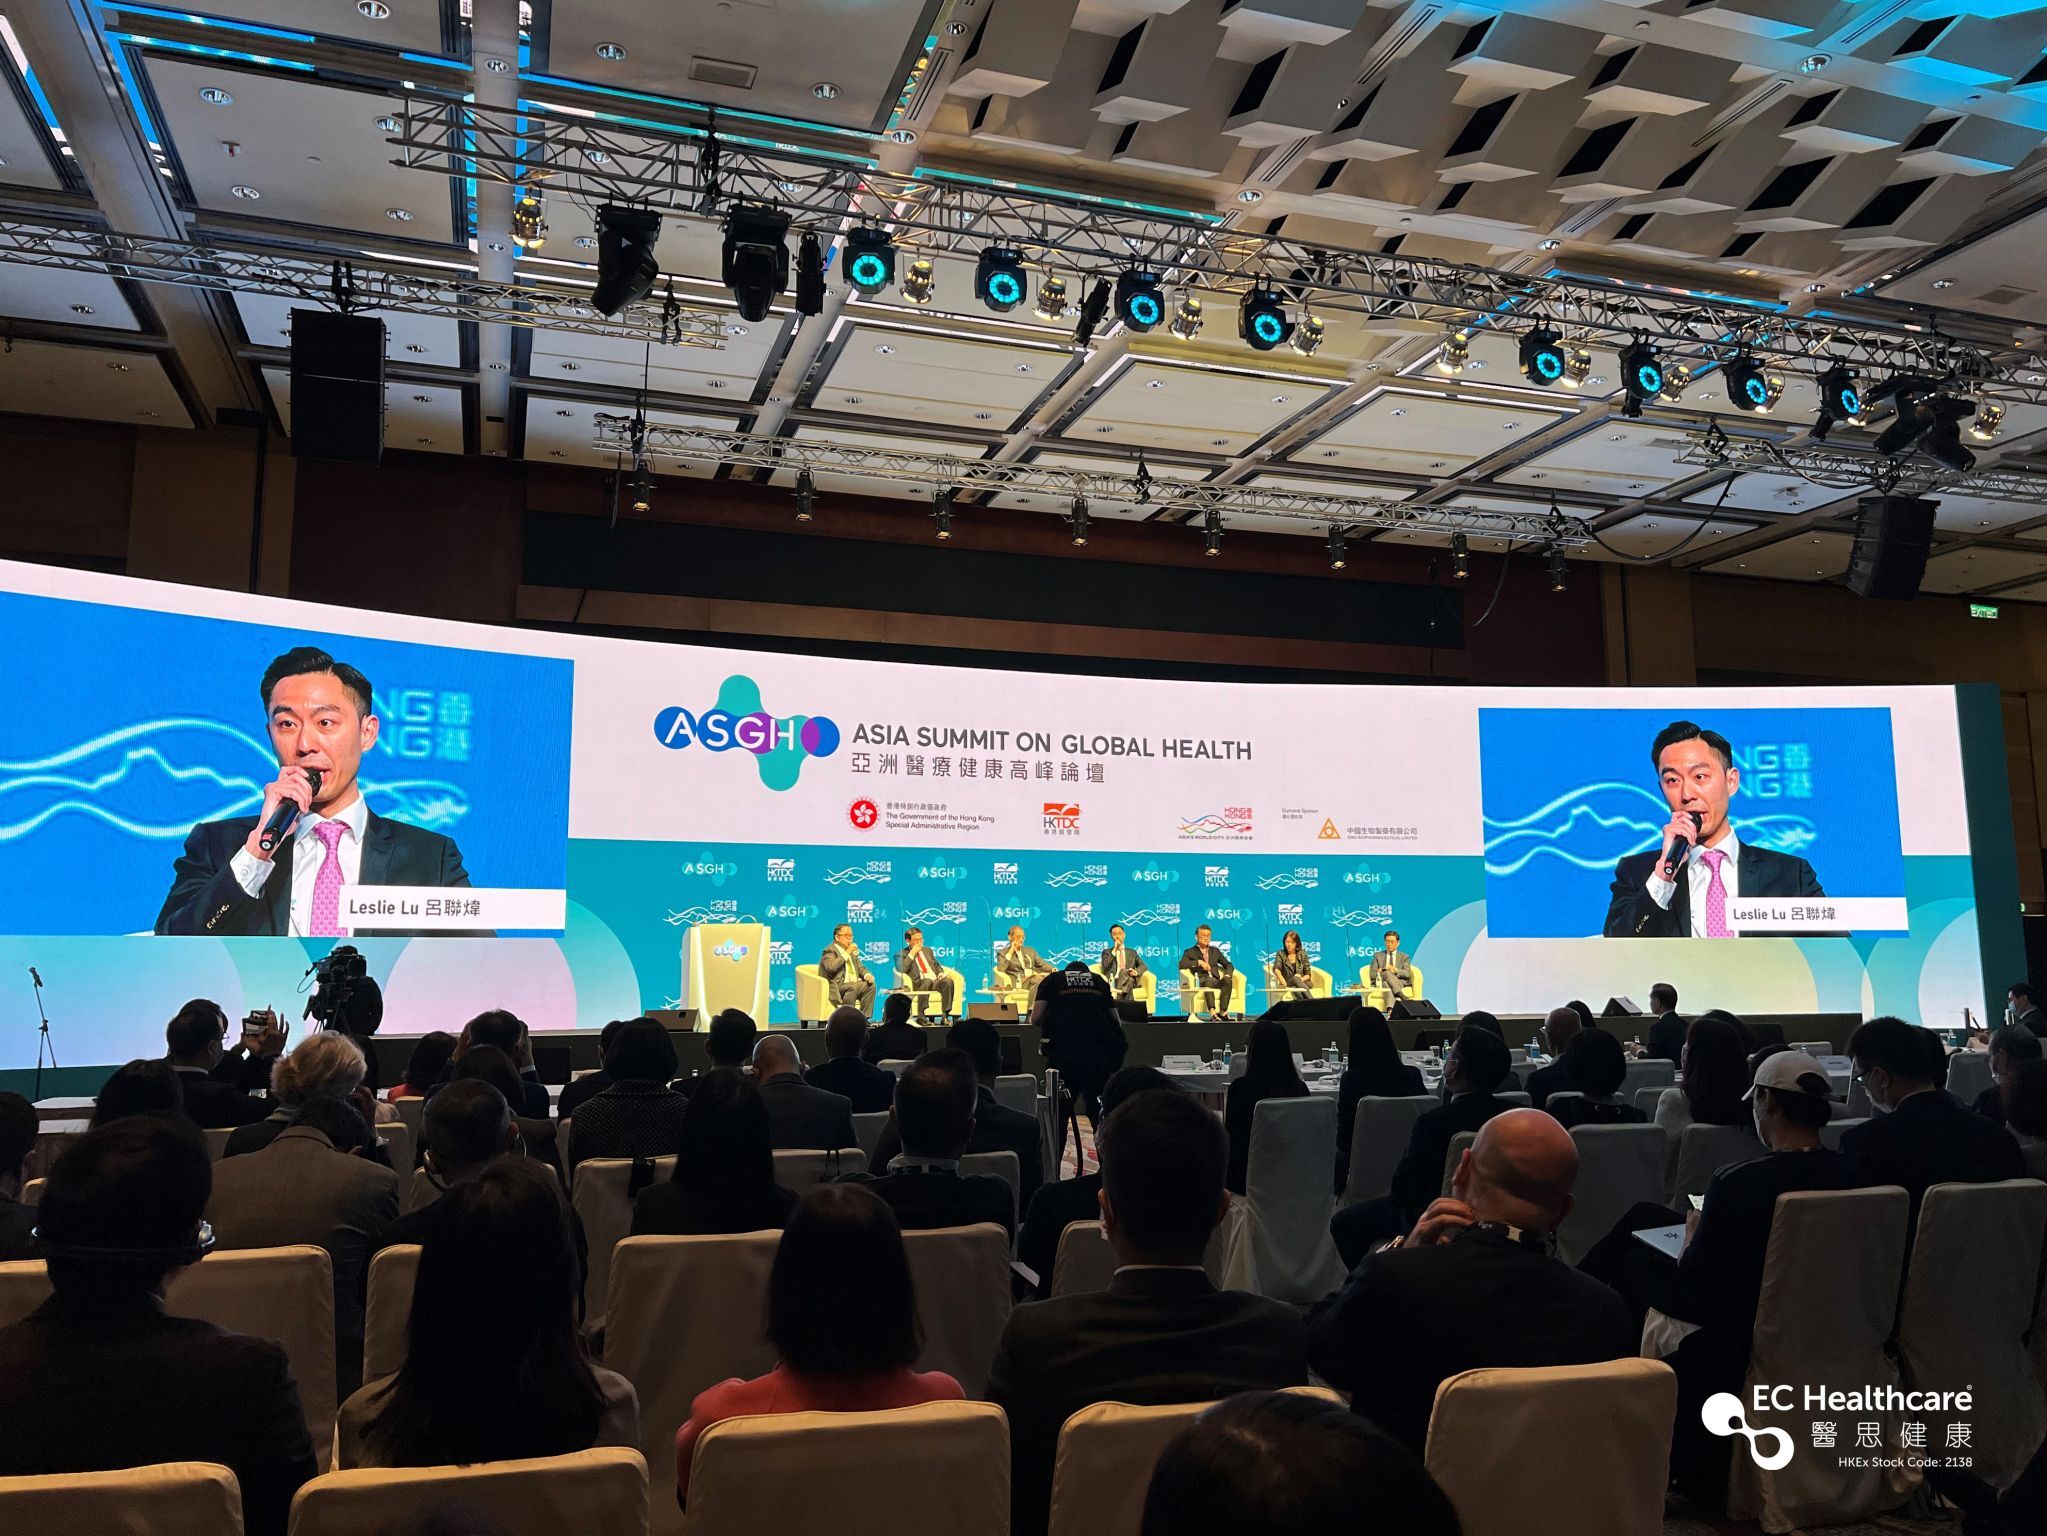 Mr. Leslie Lu, Co-CEO of EC Healthcare, attended the first Asian Healthcare Summit as a guest speaker